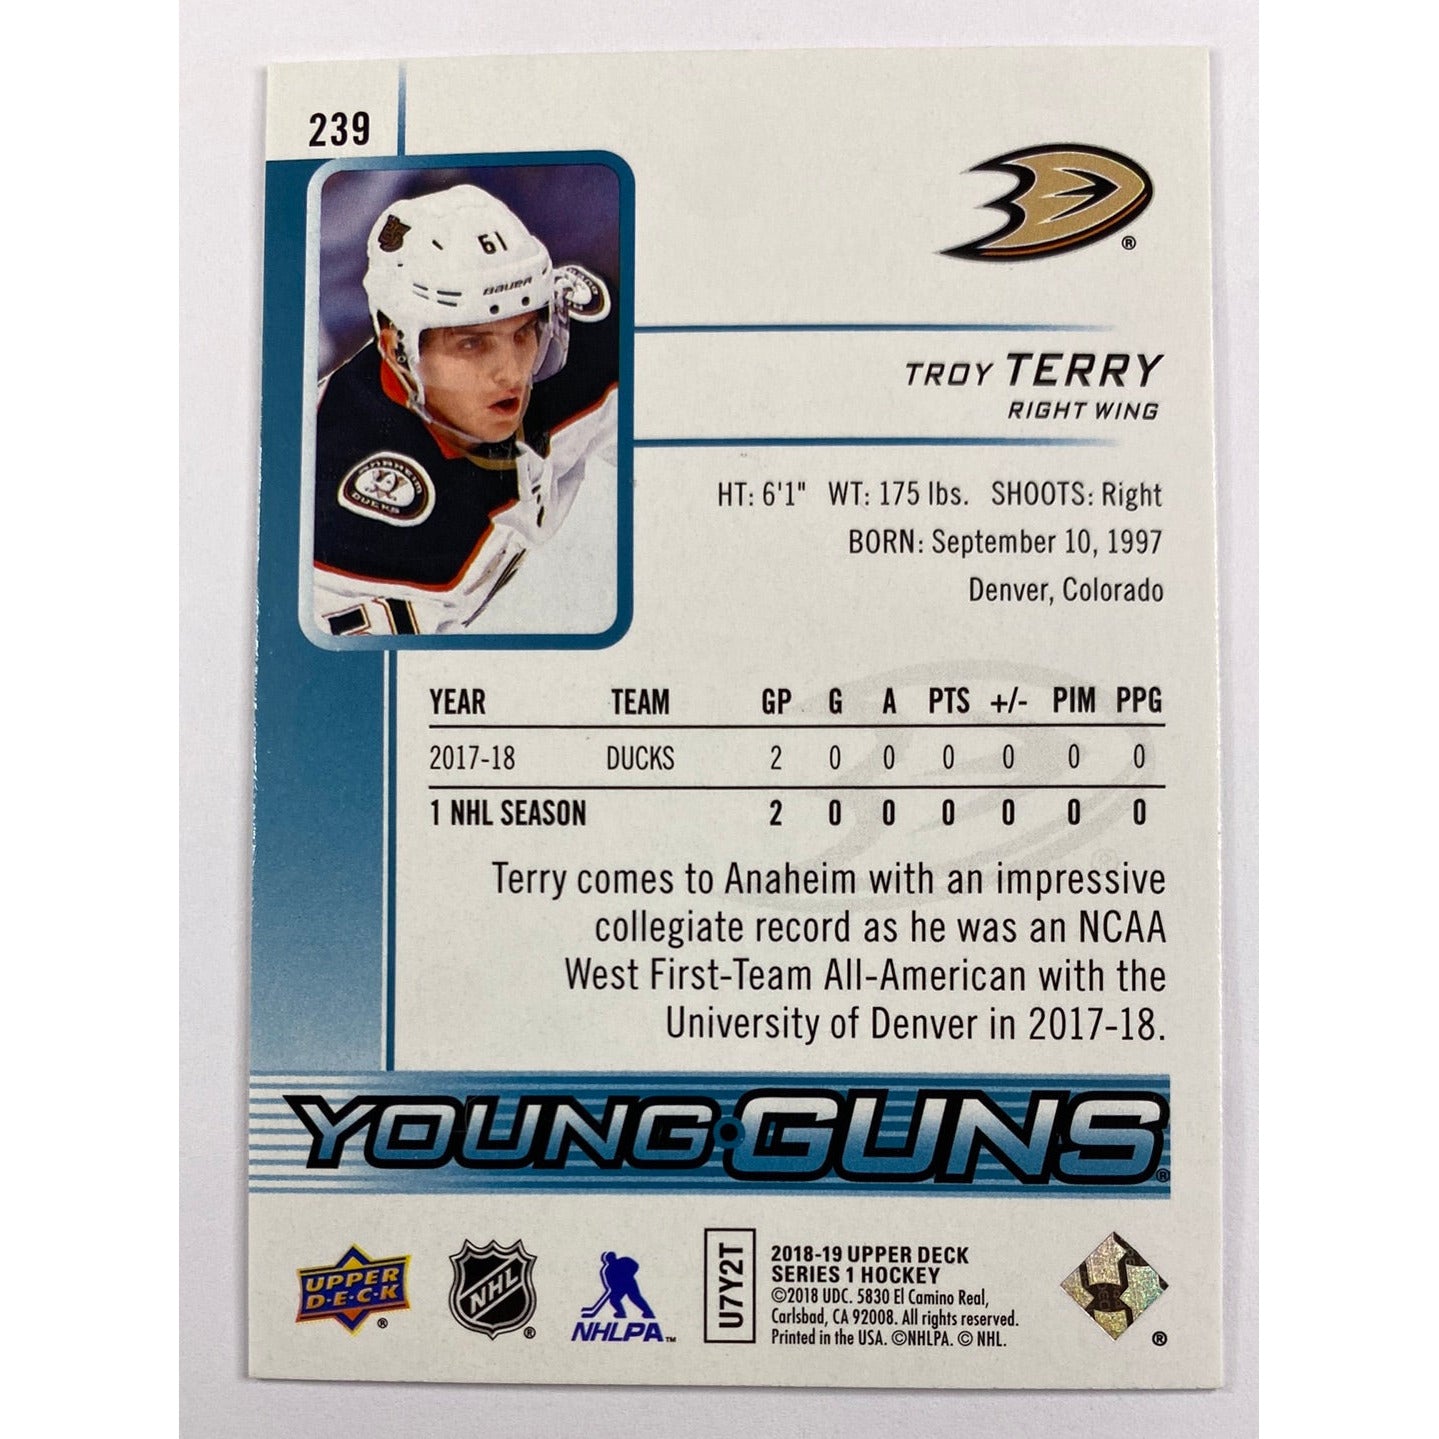 2018-19 Series 1 Troy Terry Young Guns